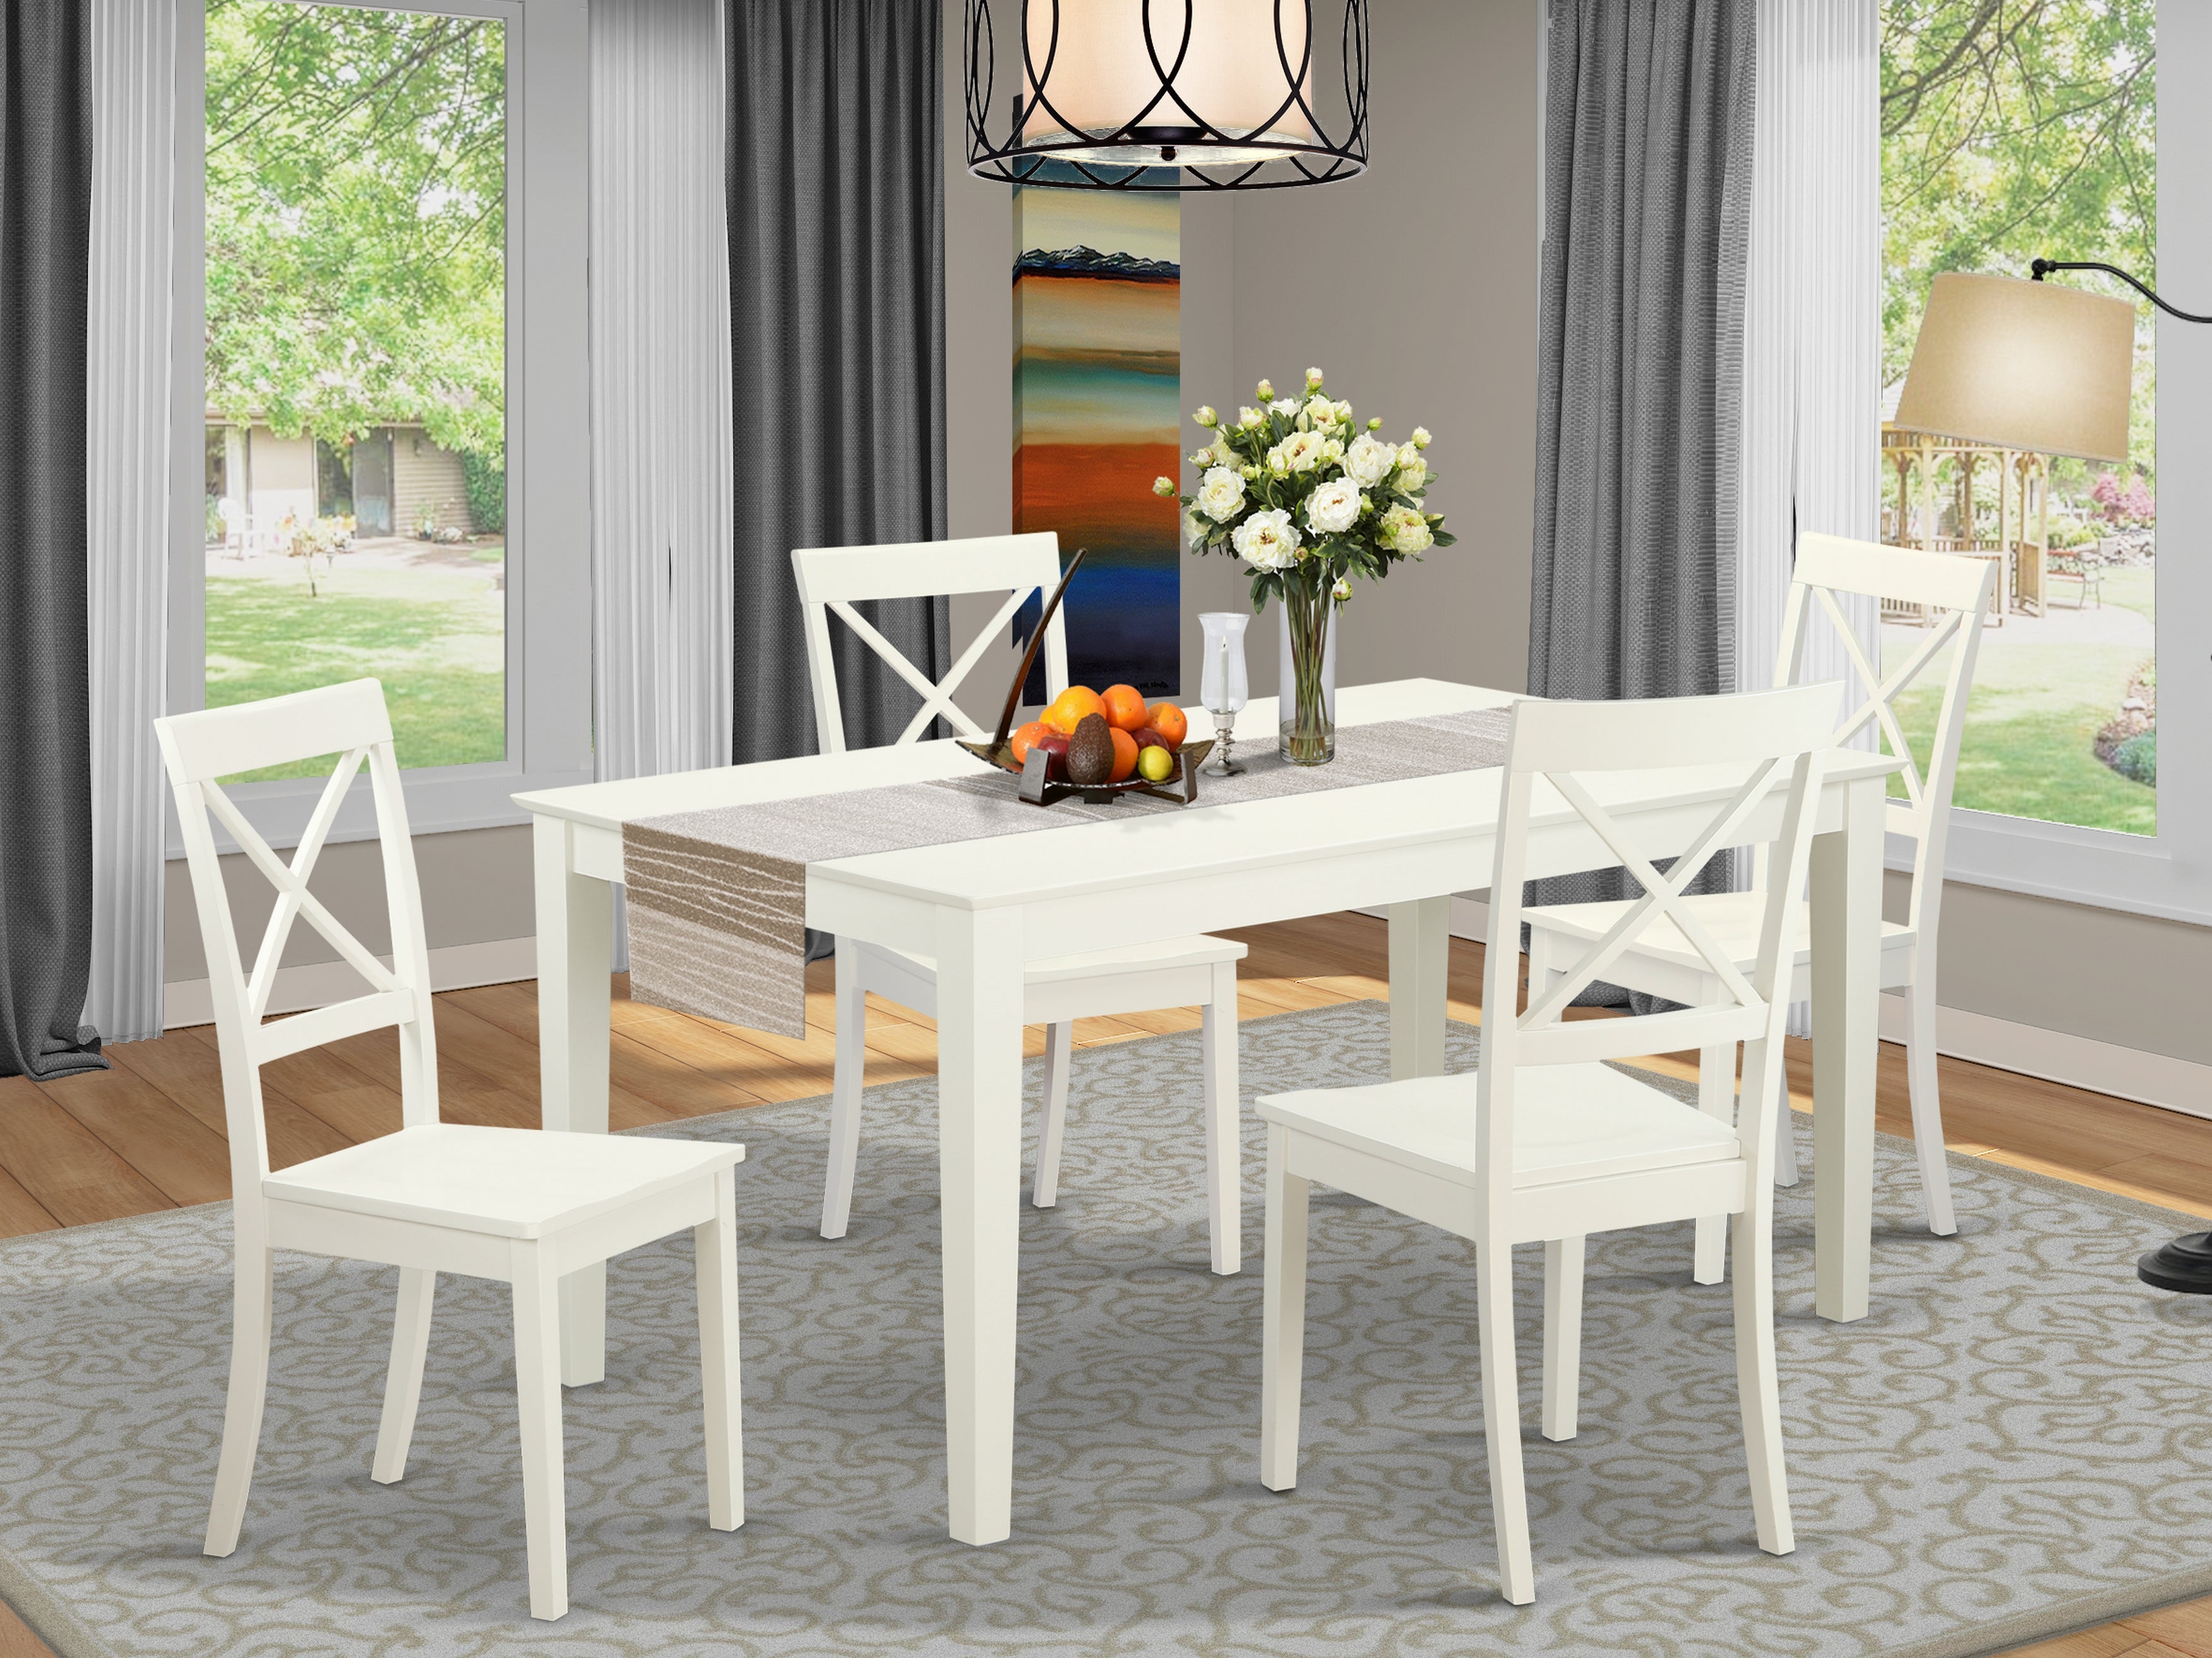 CABO5-LWH-W 5 Piece dining table set for 4- Dining table and 4 Wood seat dining chairs